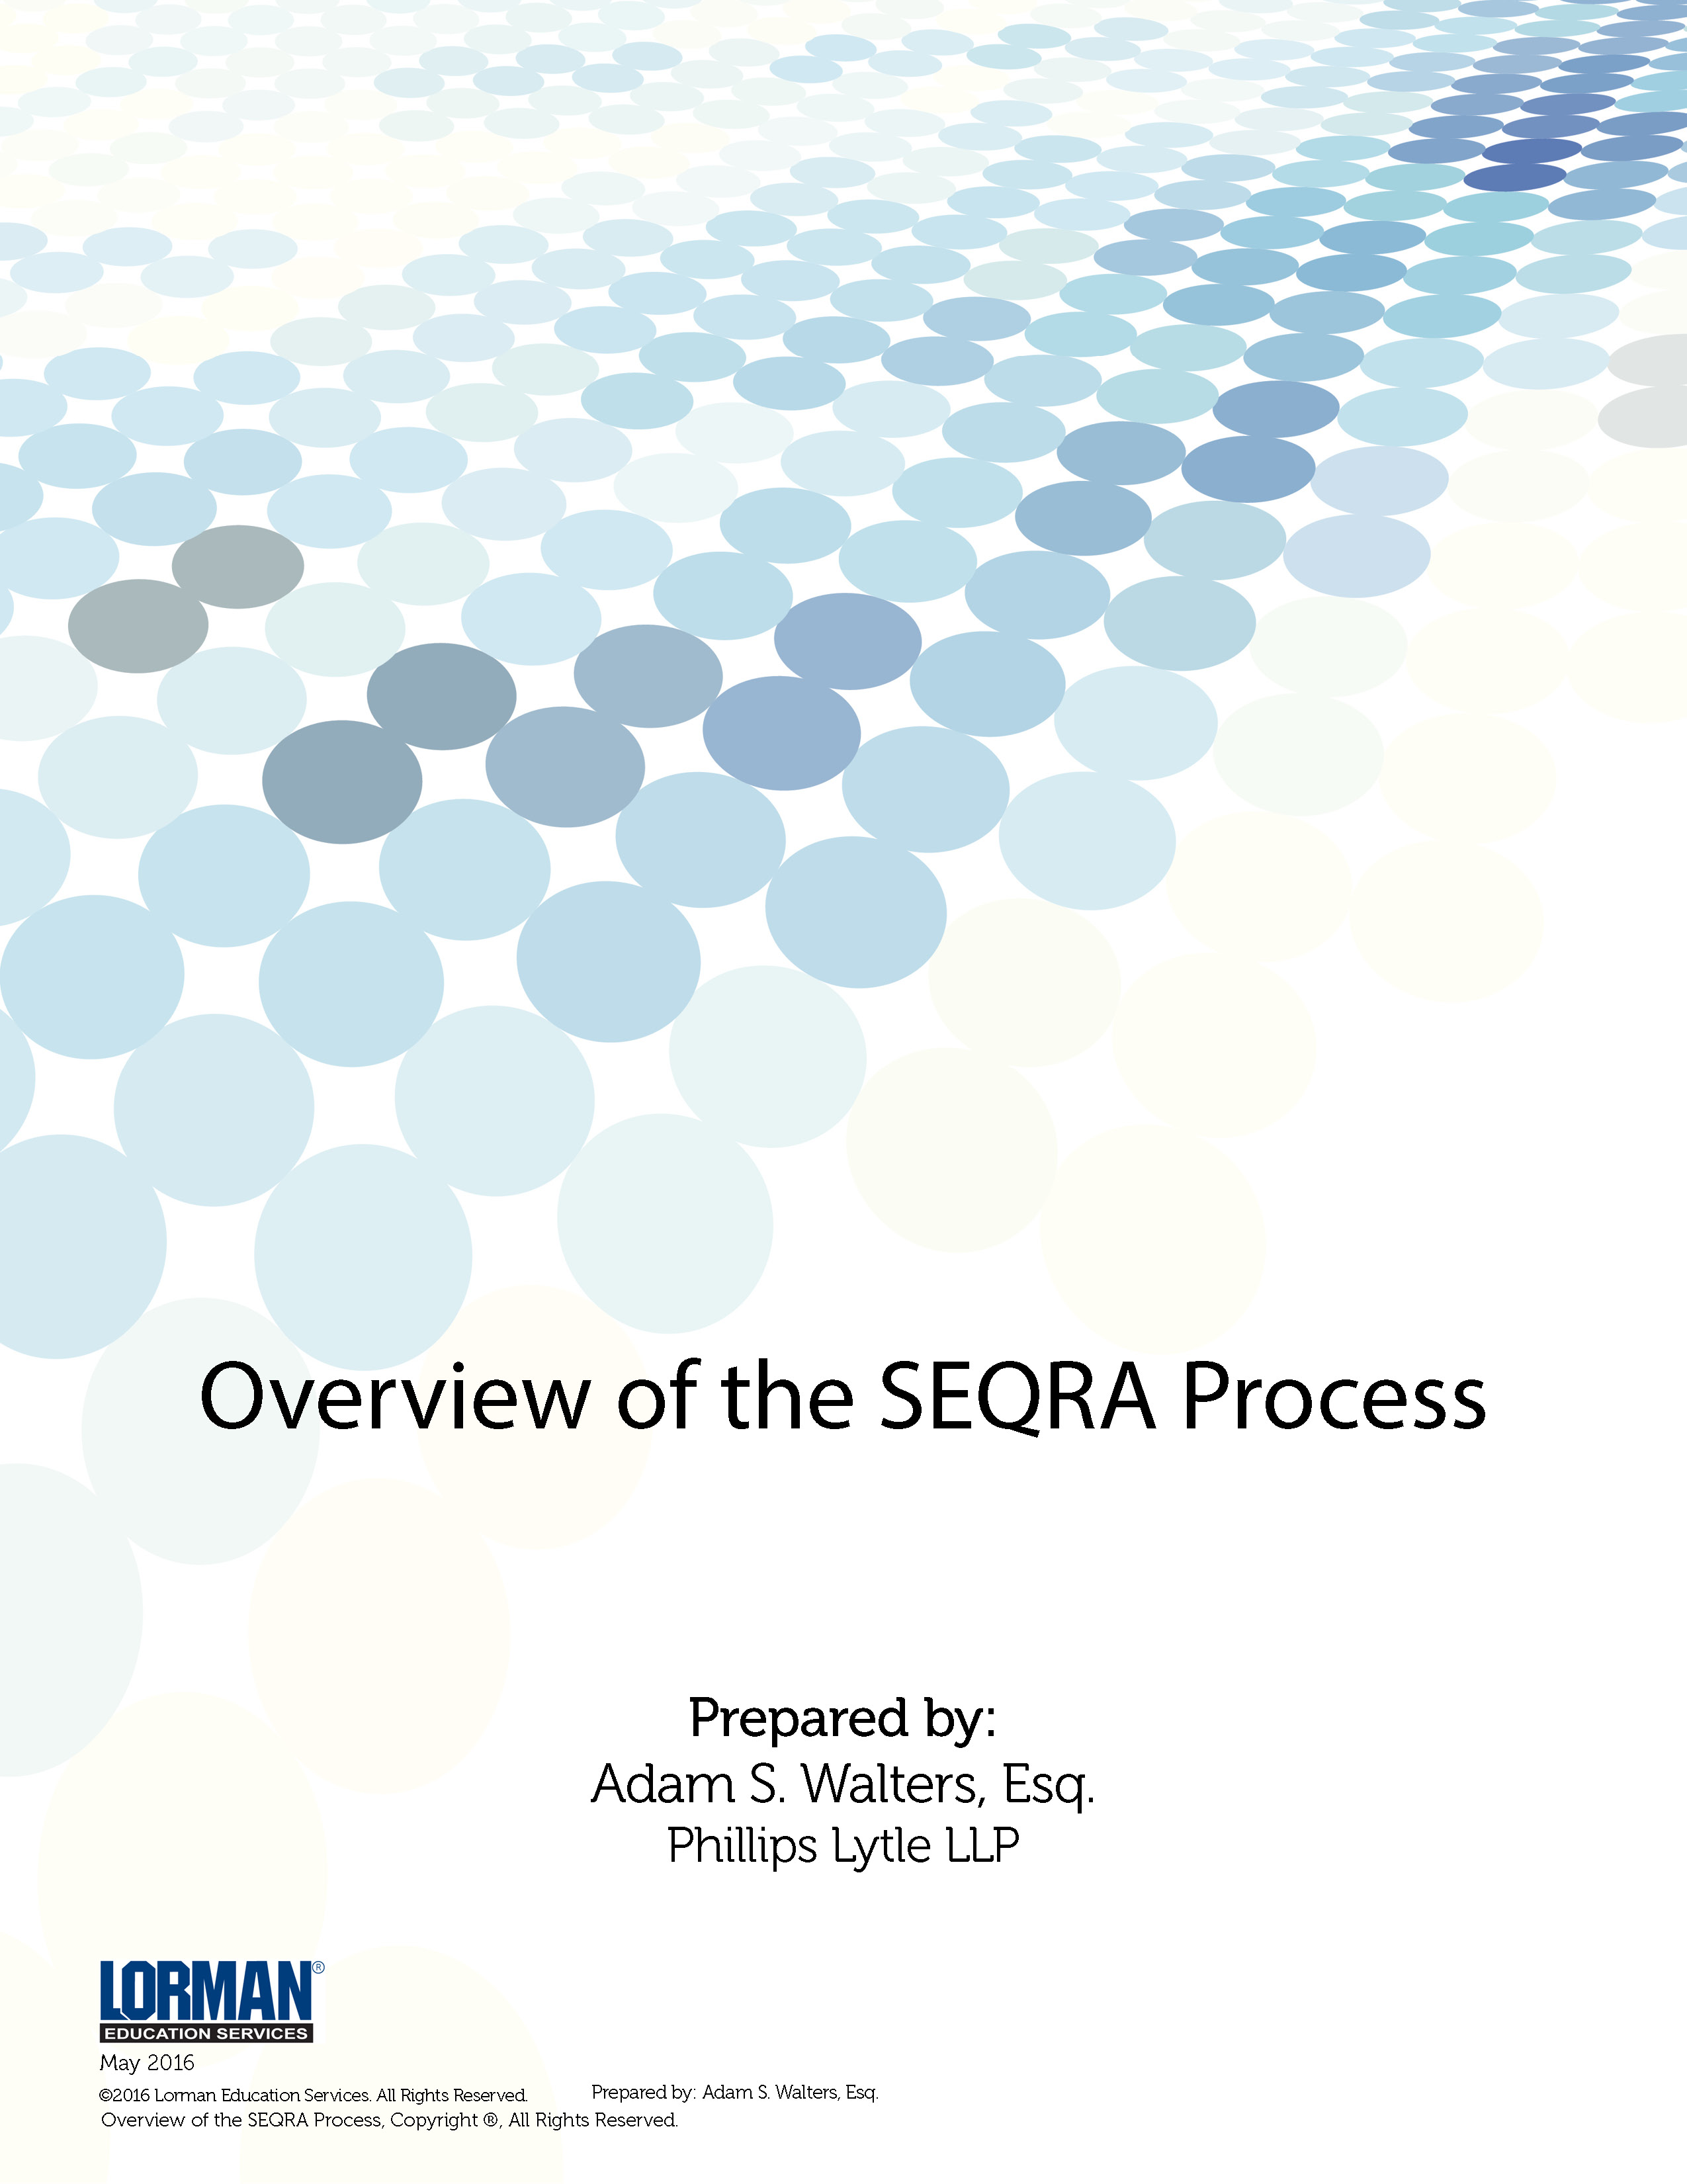 Overview of the SEQRA Process